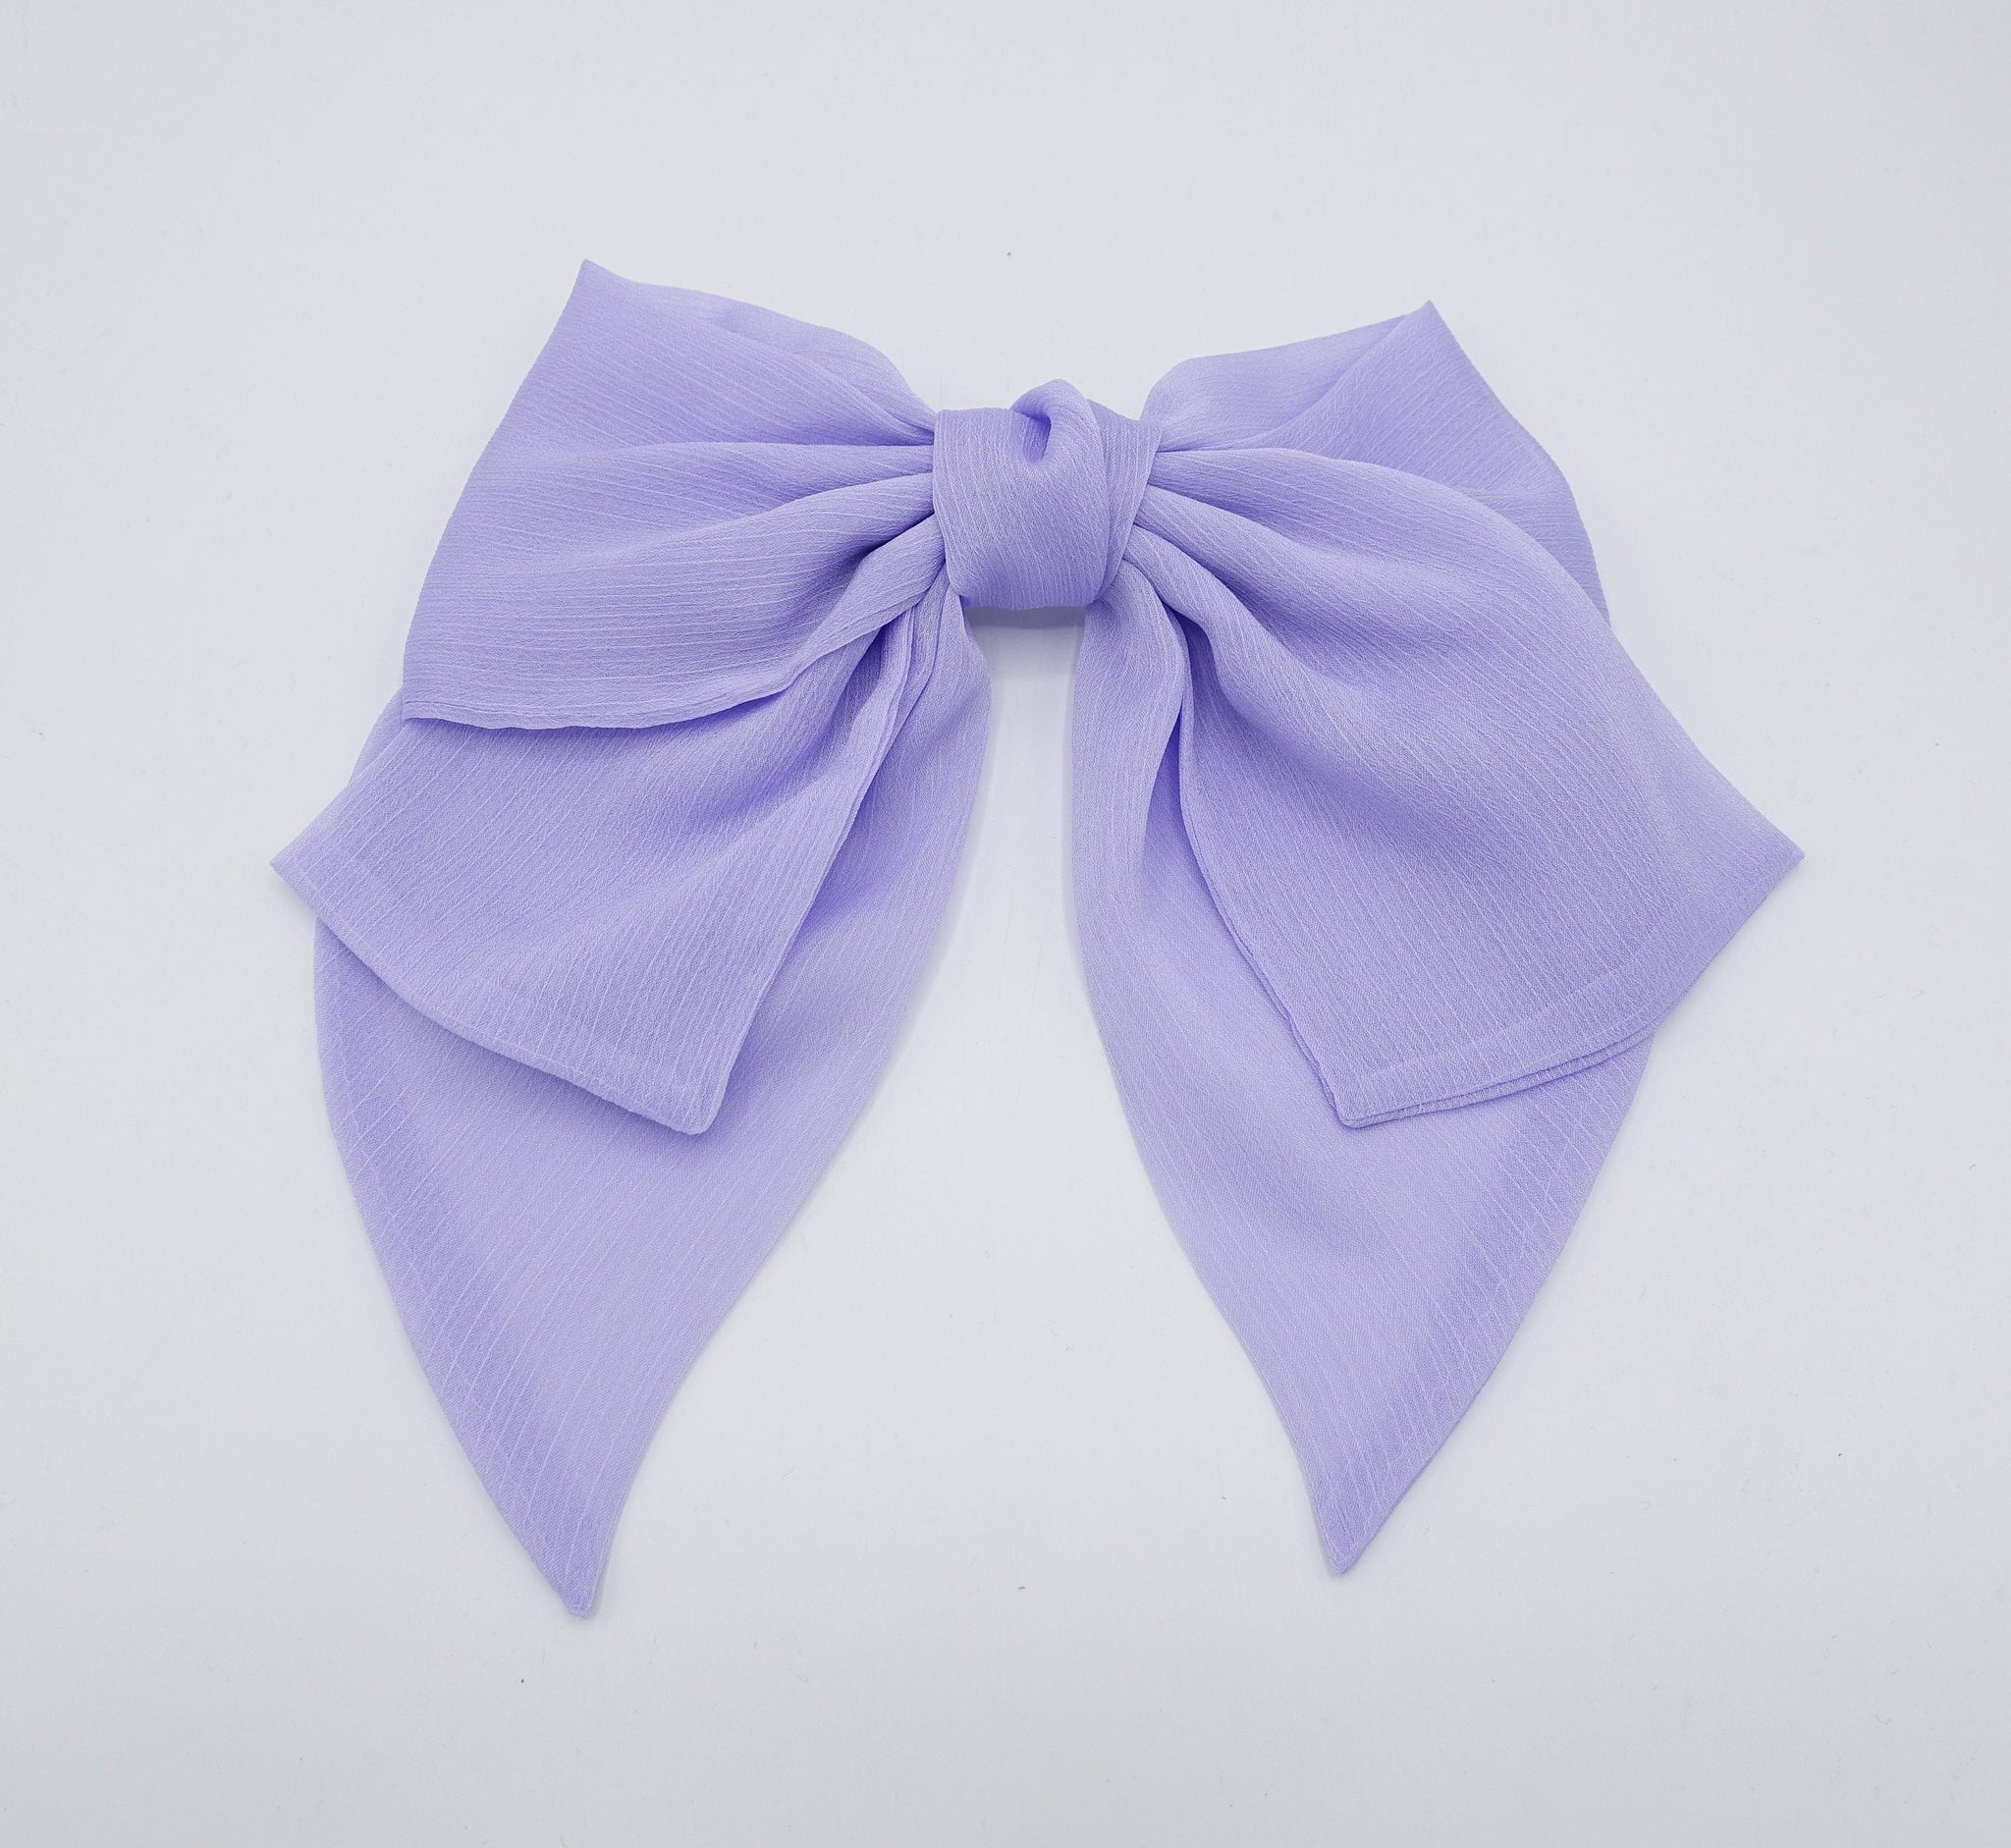 VeryShine chiffon 2 tails hair bow large hair accessory for women